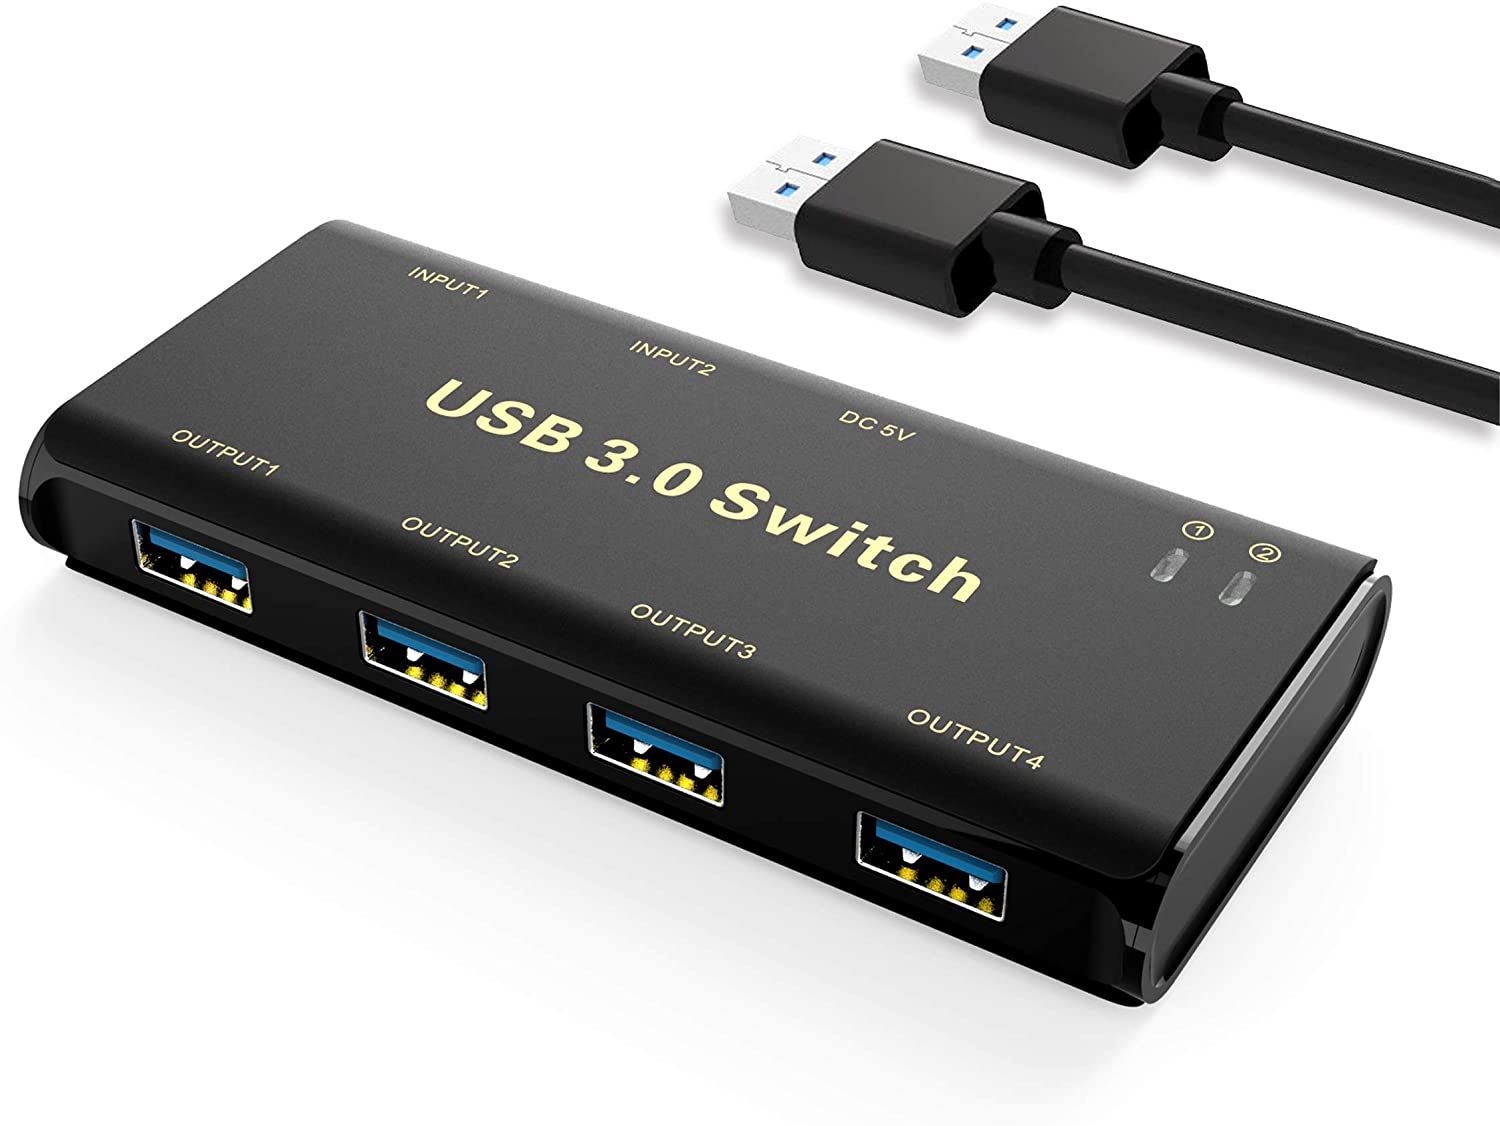 ABLEWE 4-Port USB 3.0 Peripheral Switch Selector $6.60 at Amazon